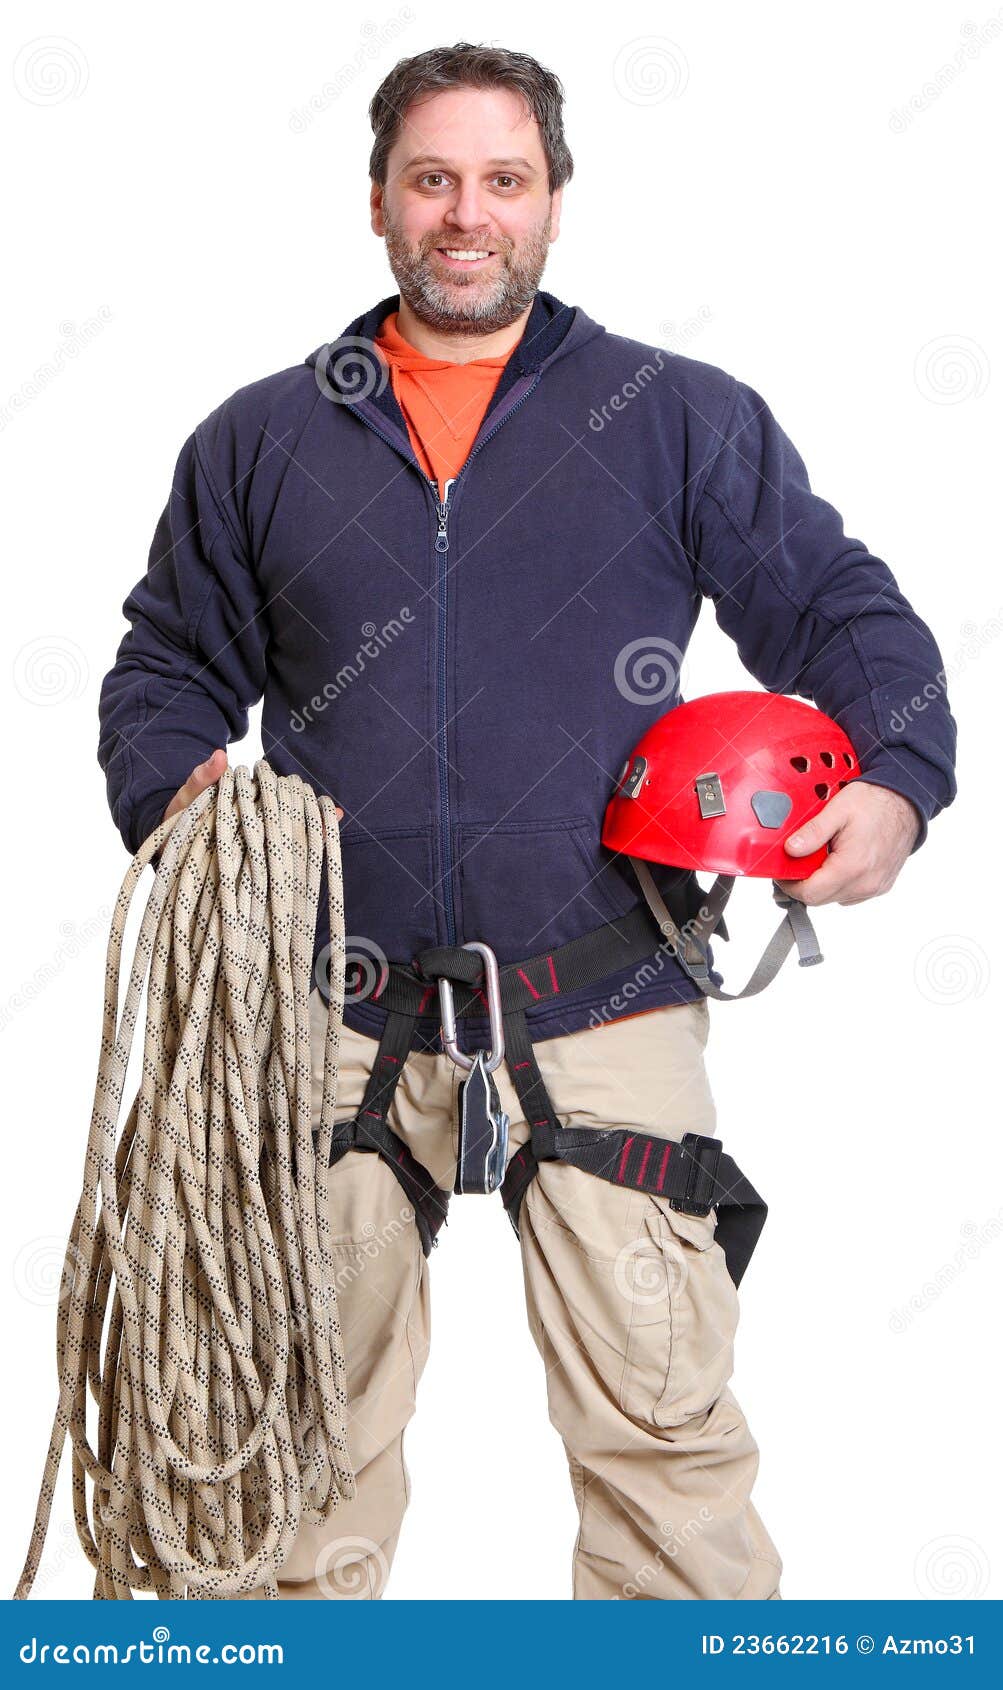 alpinist smiling with ropes and a helmet